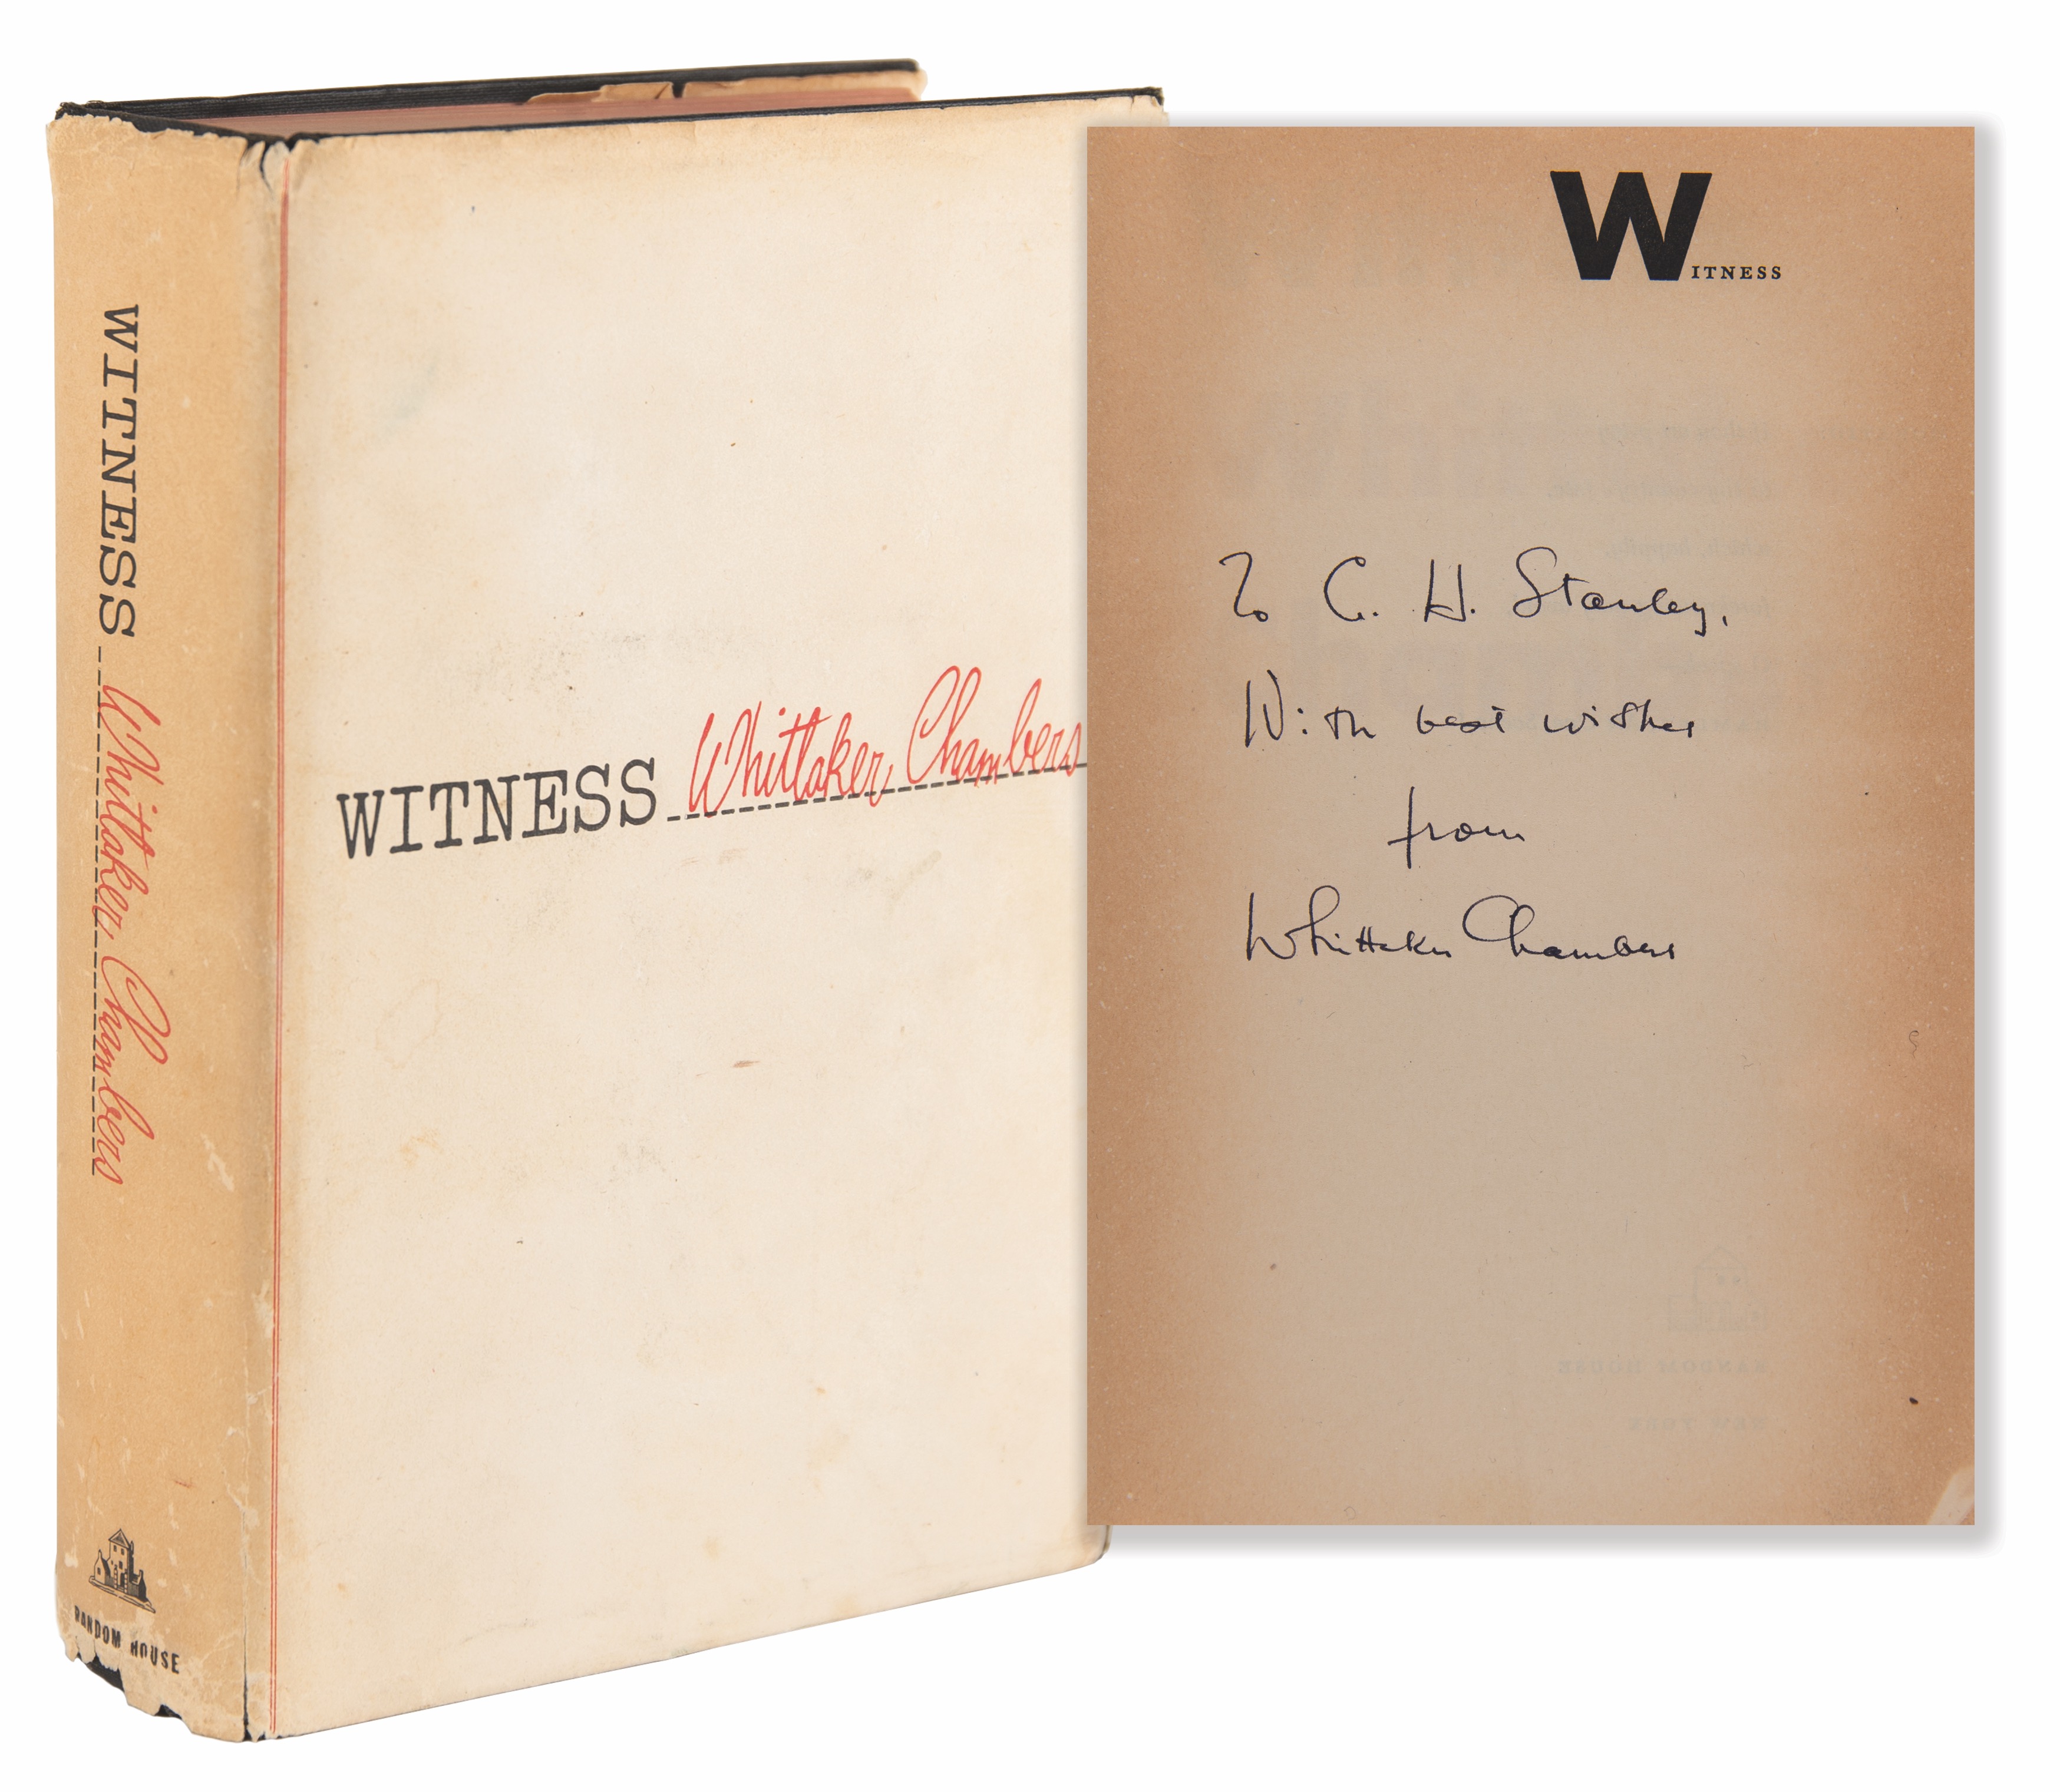 Lot #207 Whittaker Chambers Signed Book - Witness